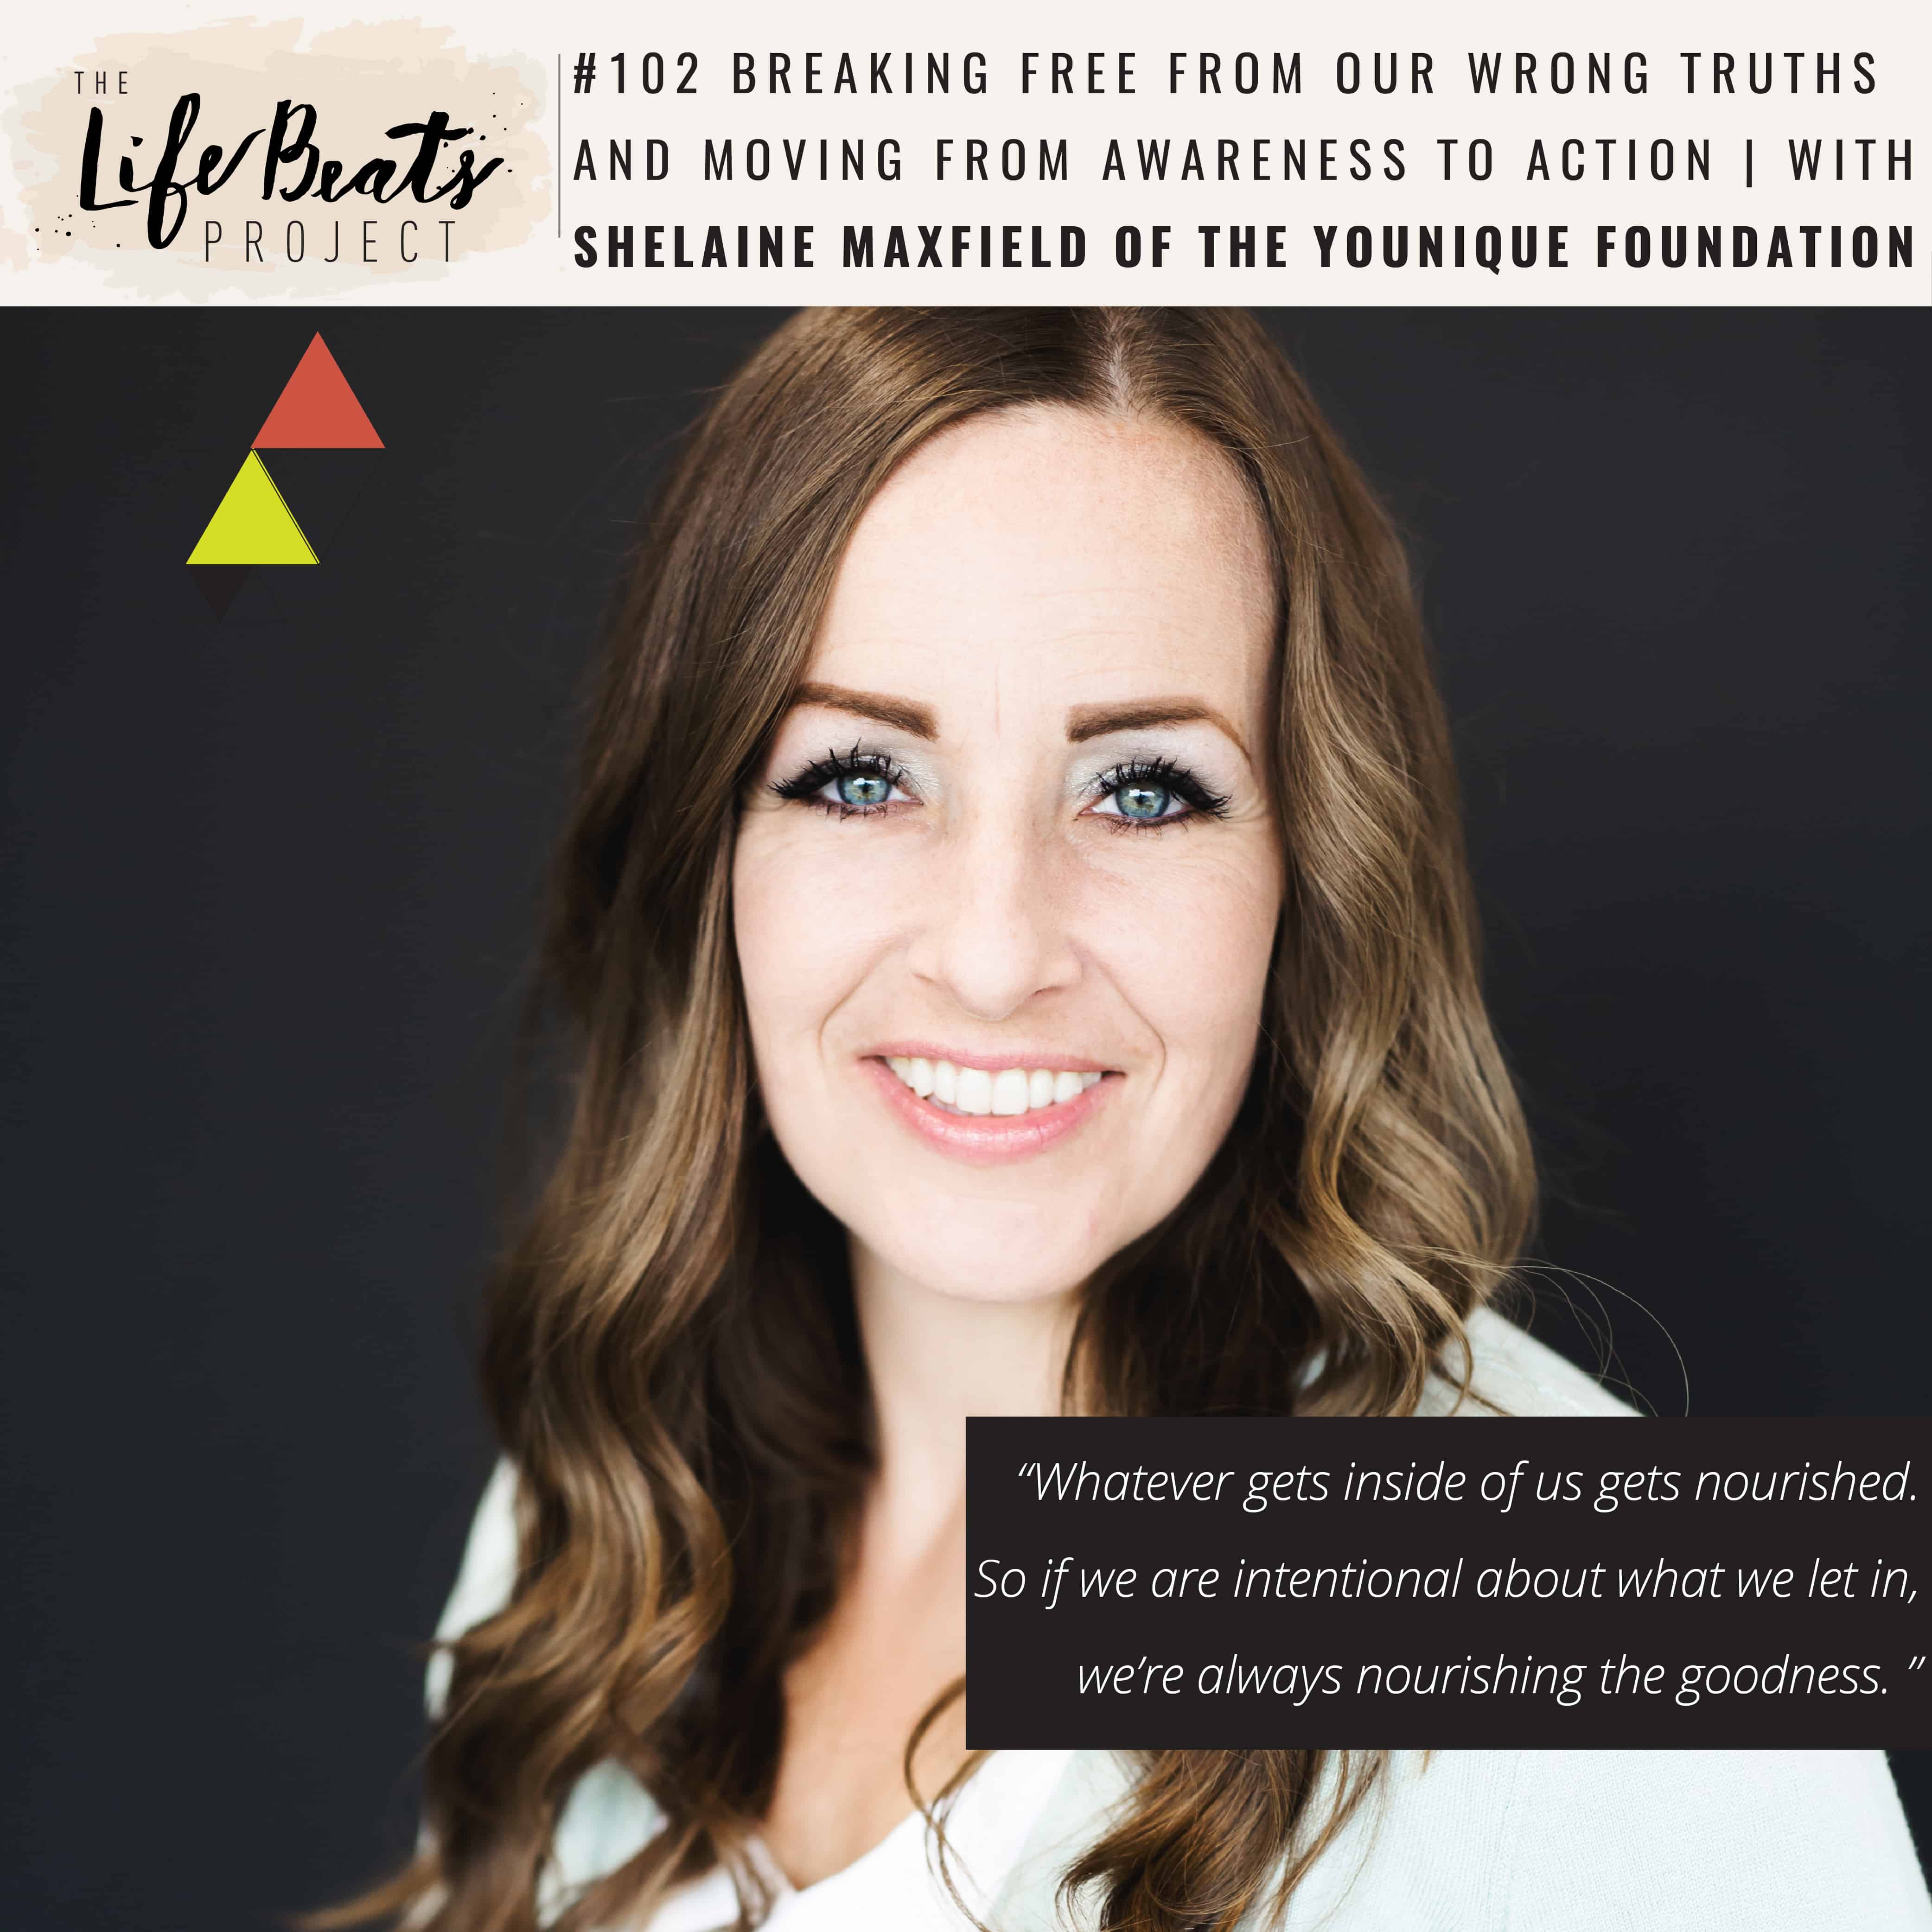 Shelaine Maxfield The Younique Foundation LifeBeats Project podcast childhood sexual abuse purpose God Haven retreat